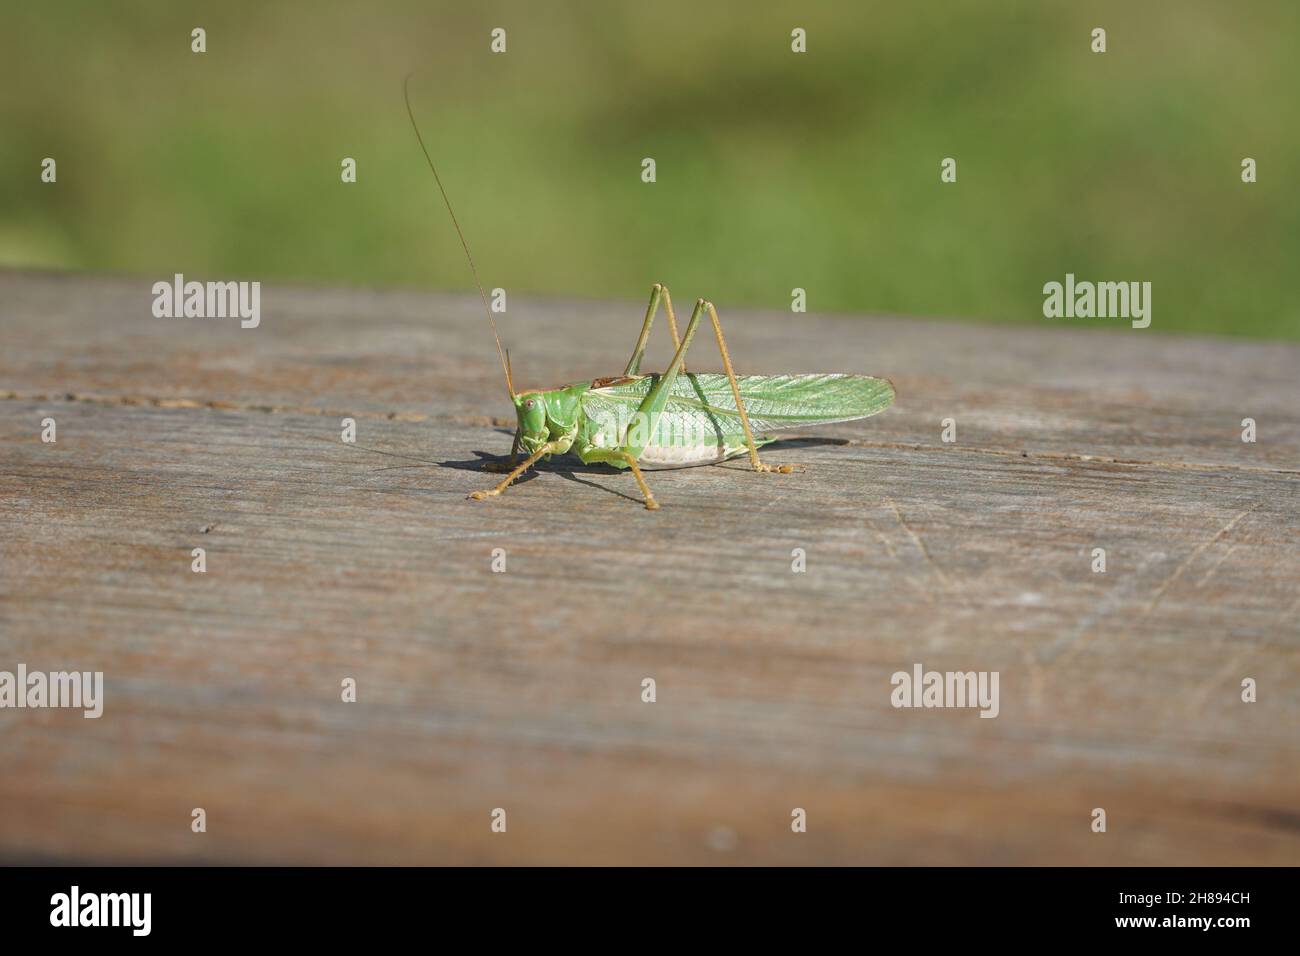 Green grasshopper on a wooden surface closeup. Wildlife. Grasshoppers, katydids - a family of Orthoptera insects. Stock Photo